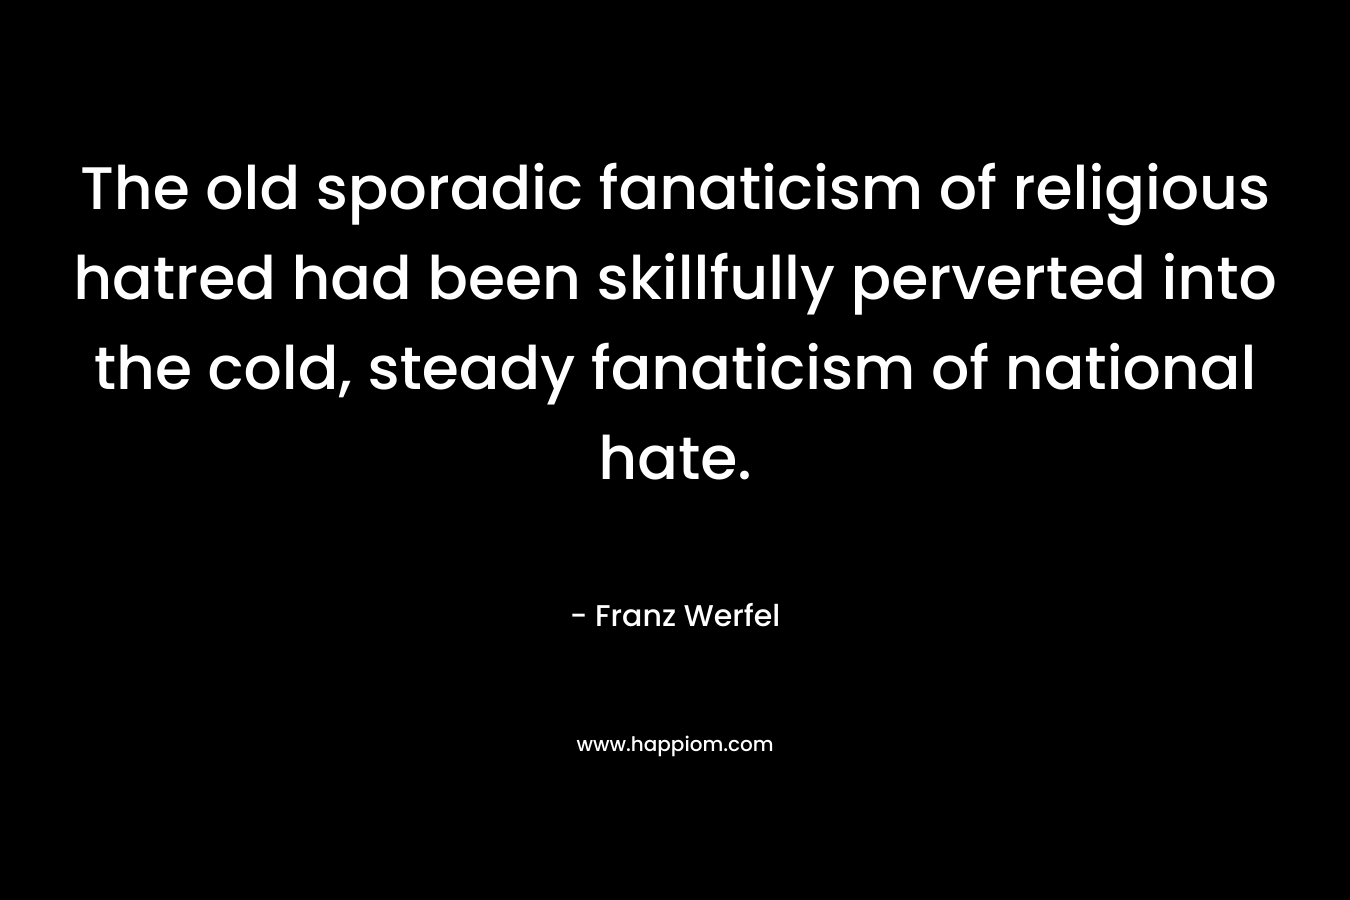 The old sporadic fanaticism of religious hatred had been skillfully perverted into the cold, steady fanaticism of national hate.